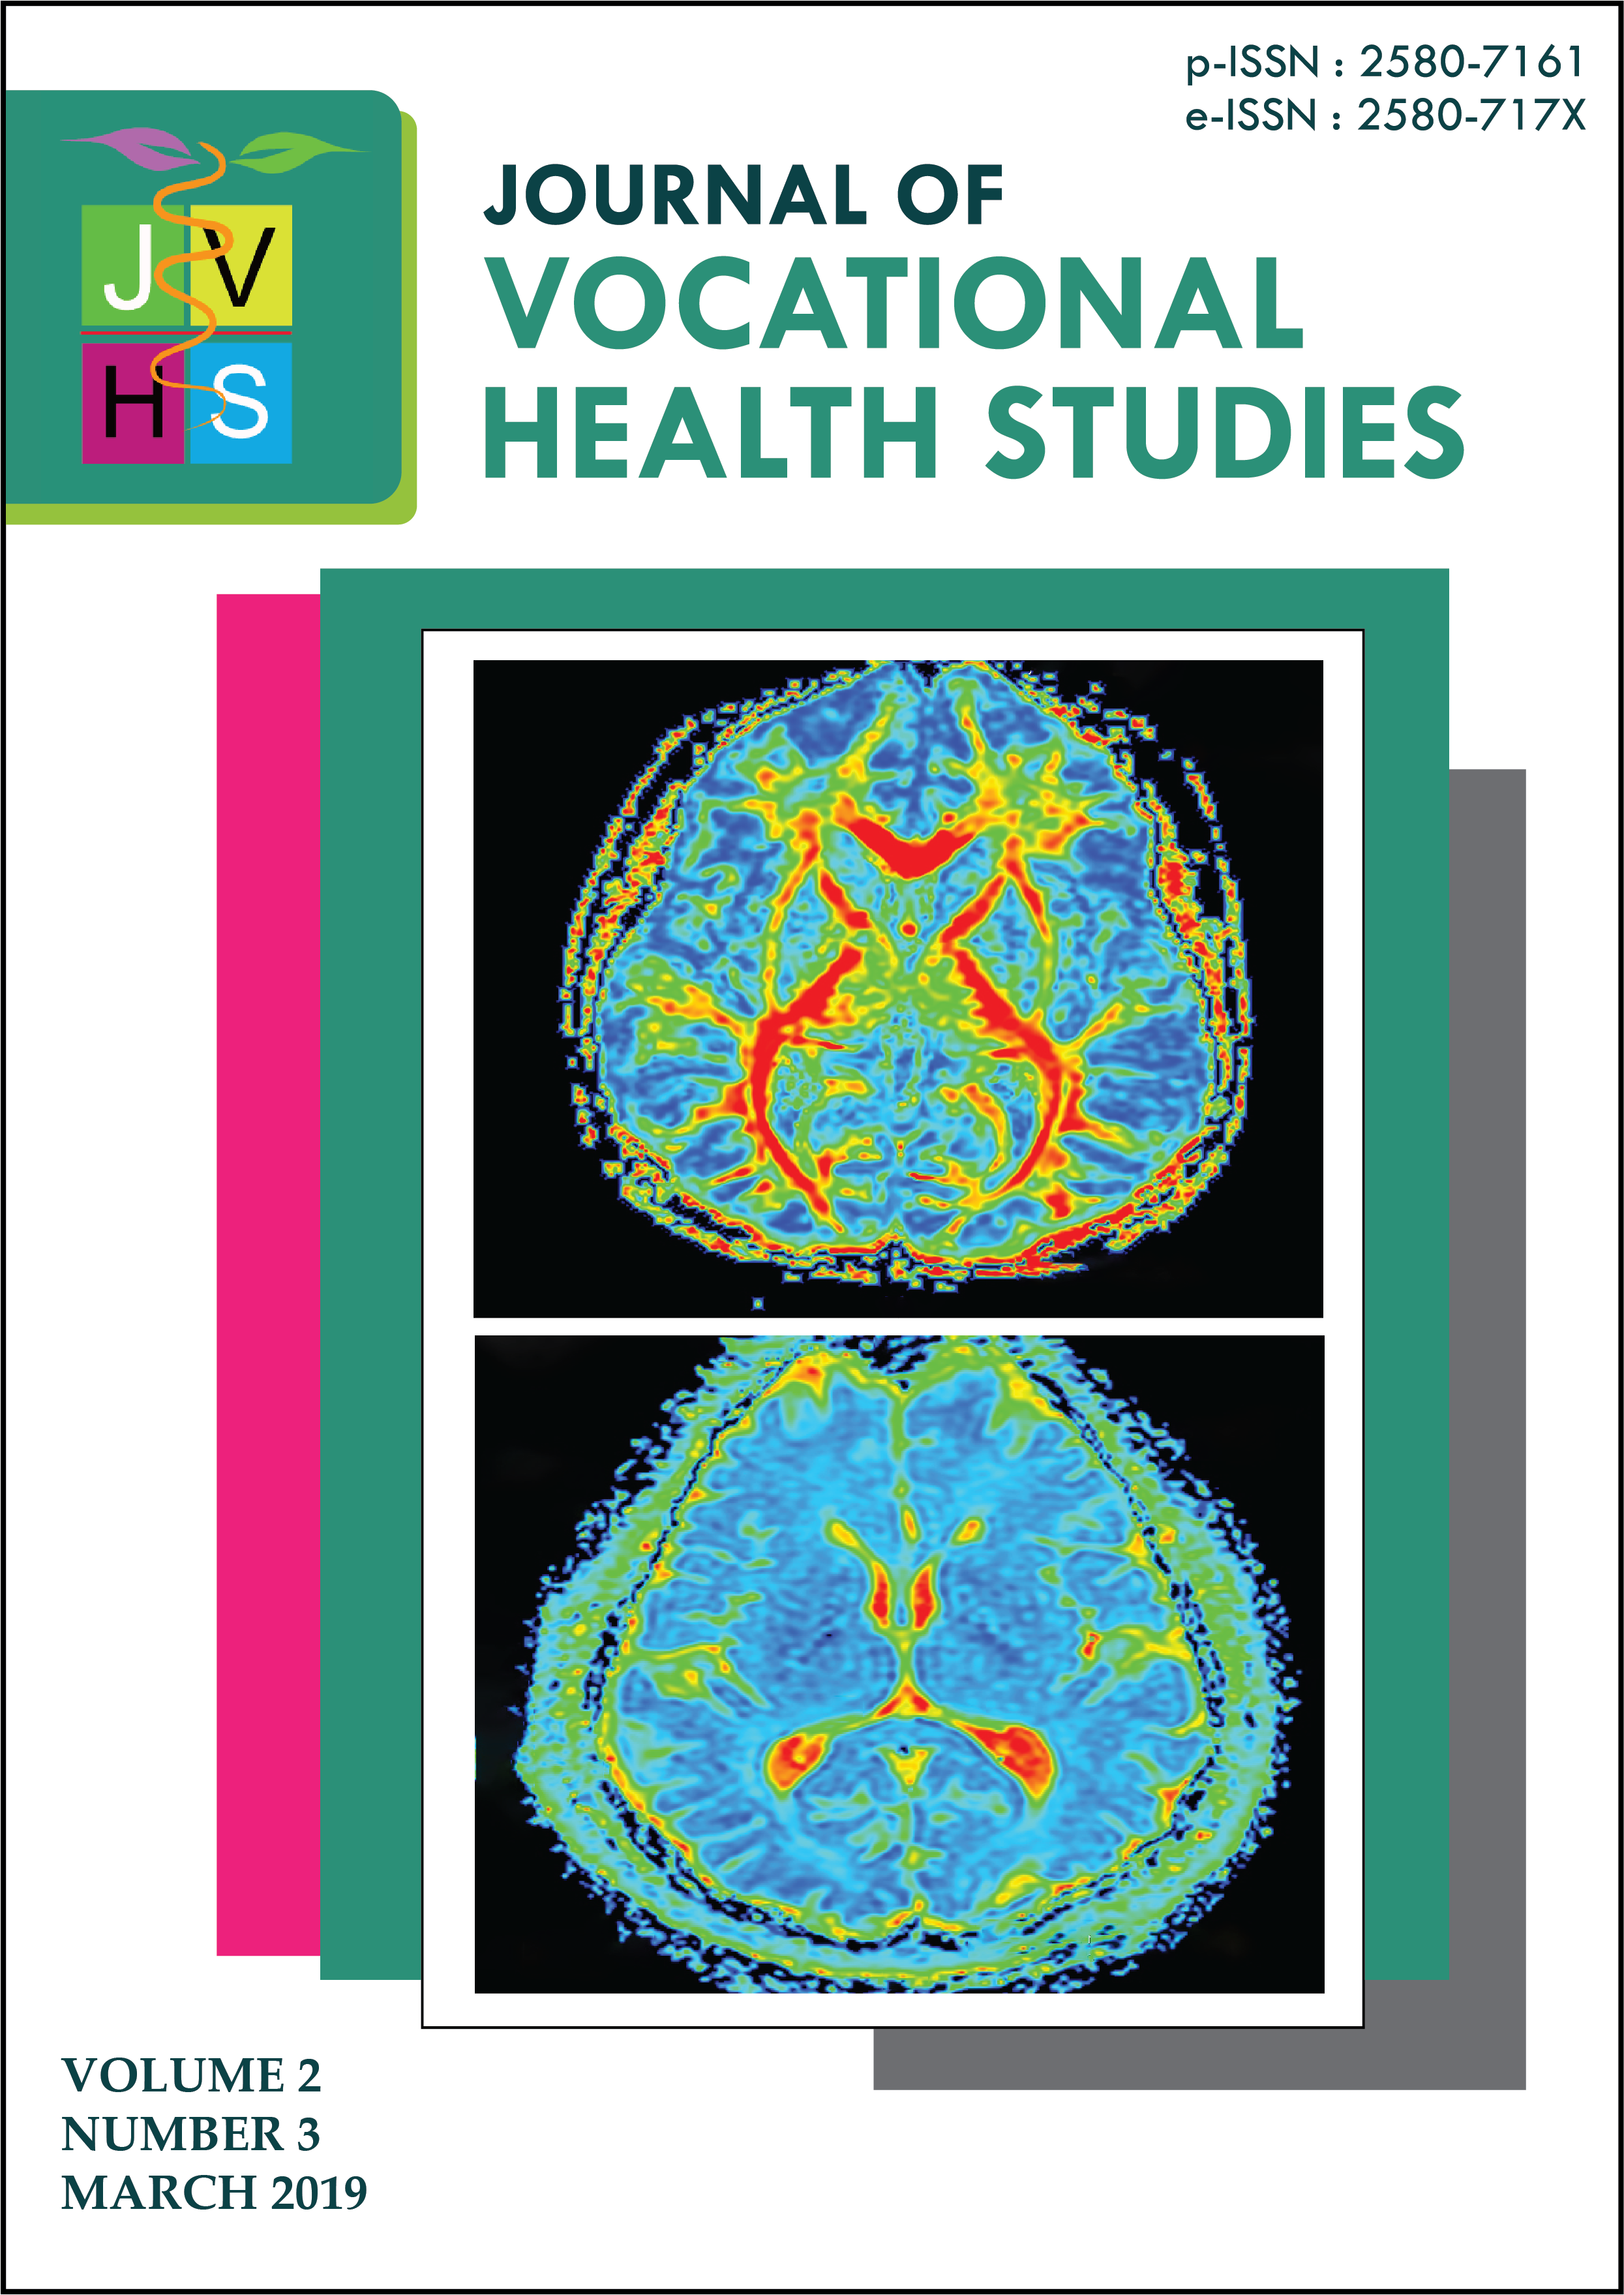 						View Vol. 2 No. 3 (2019): March 2019 | JOURNAL OF VOCATIONAL HEALTH STUDIES
					